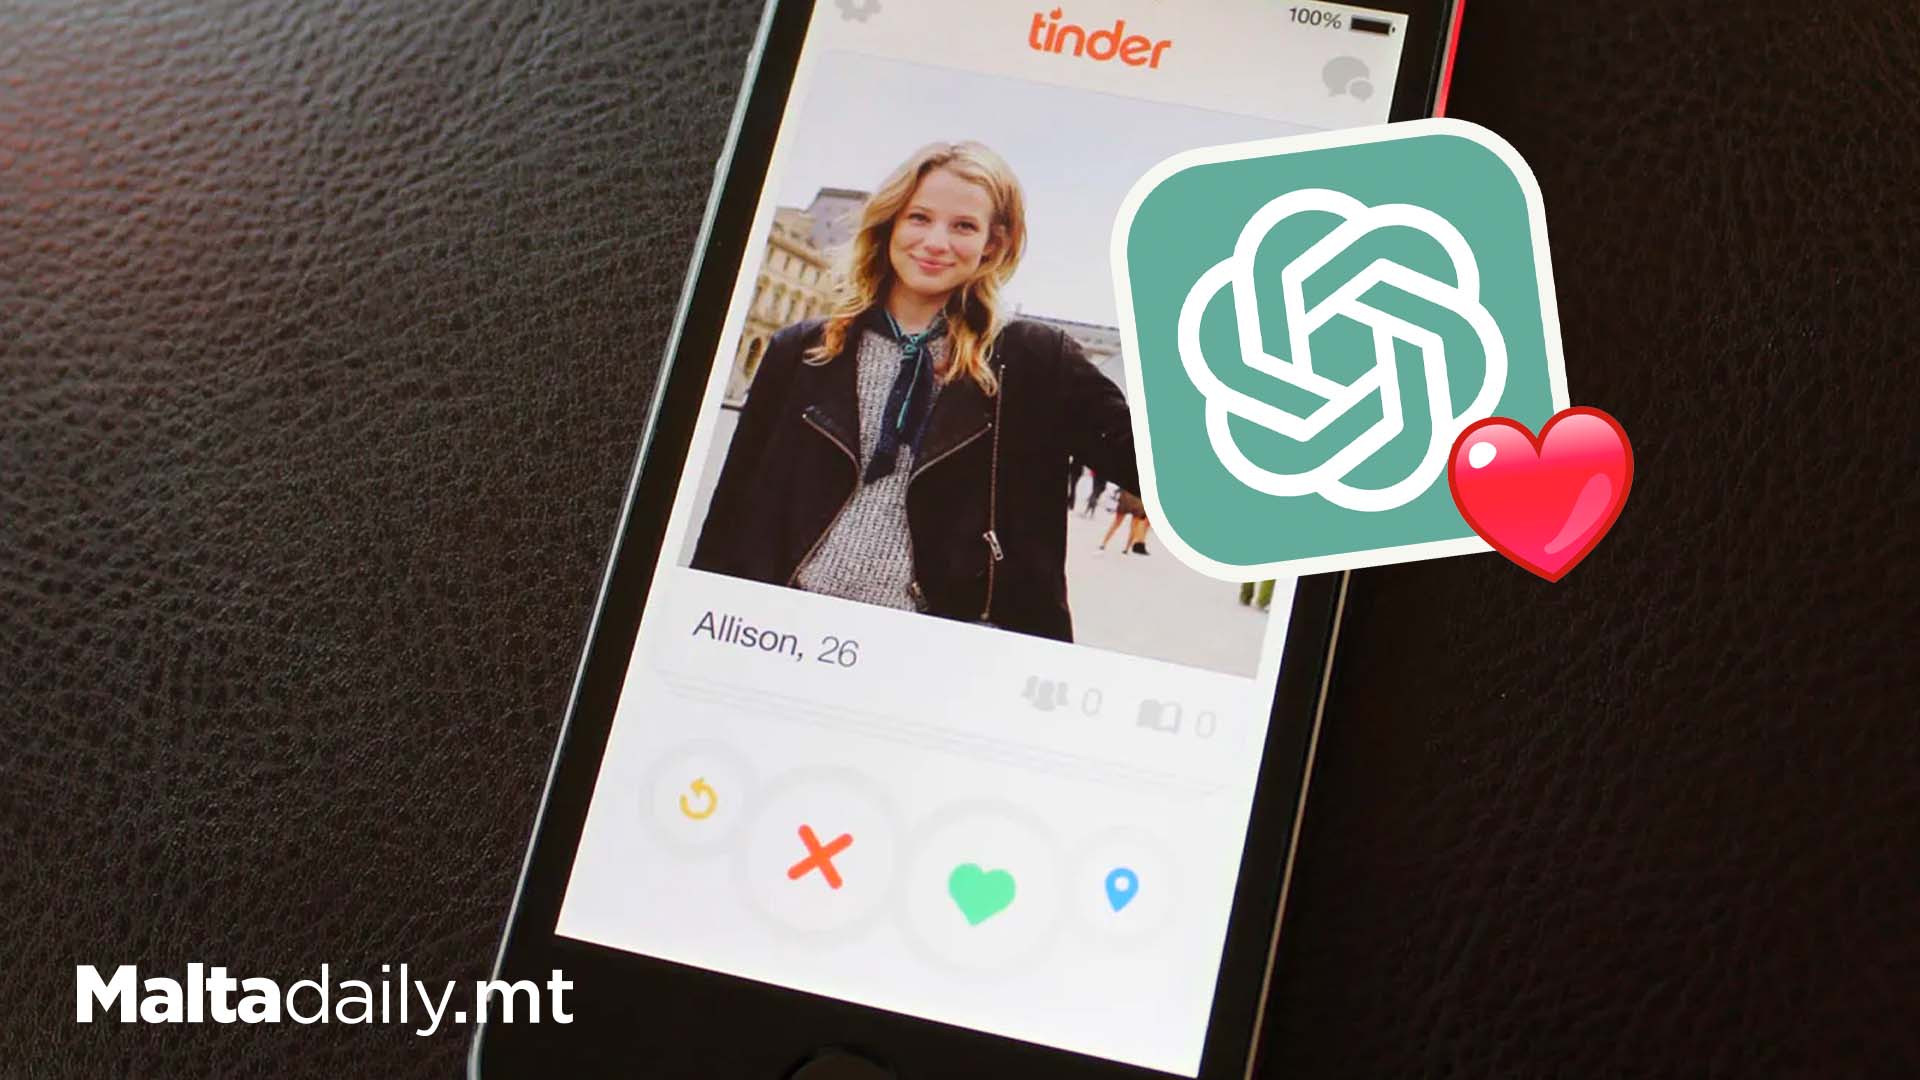 Man Gets Engaged By Using Chat GPT To Find Tinder Match